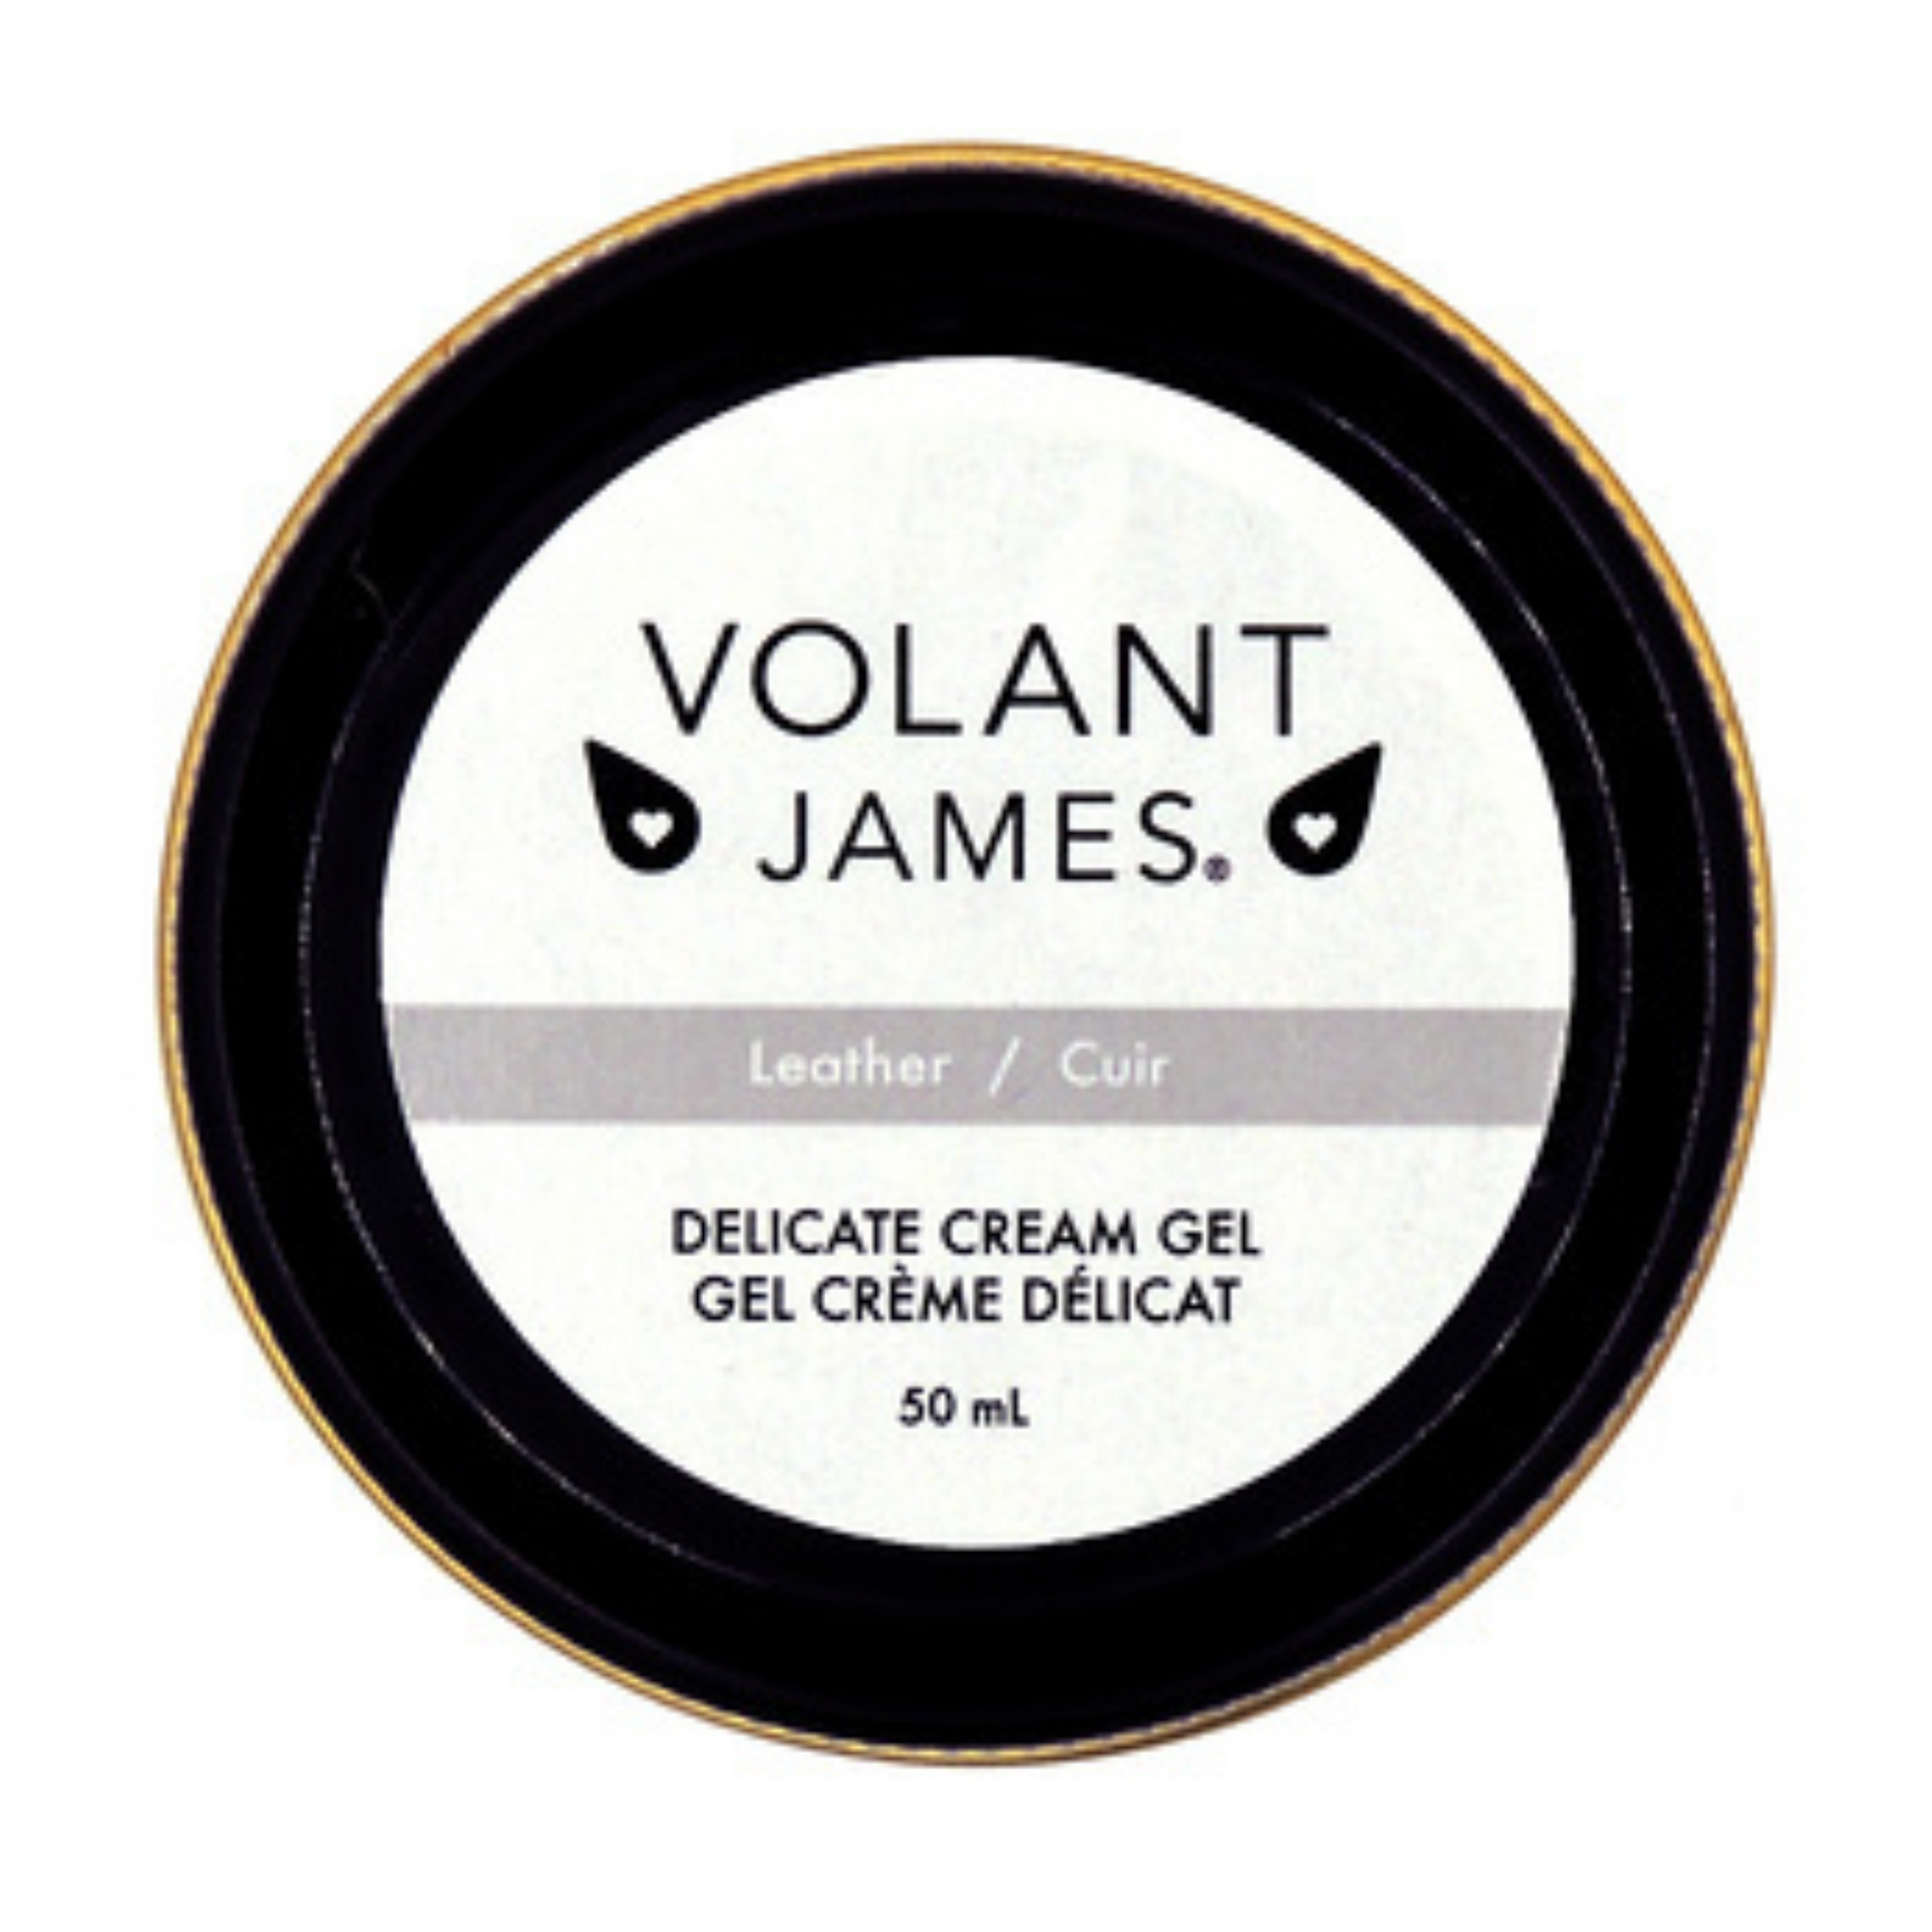 A photo of the top of the Volant James cream gel for leather container.